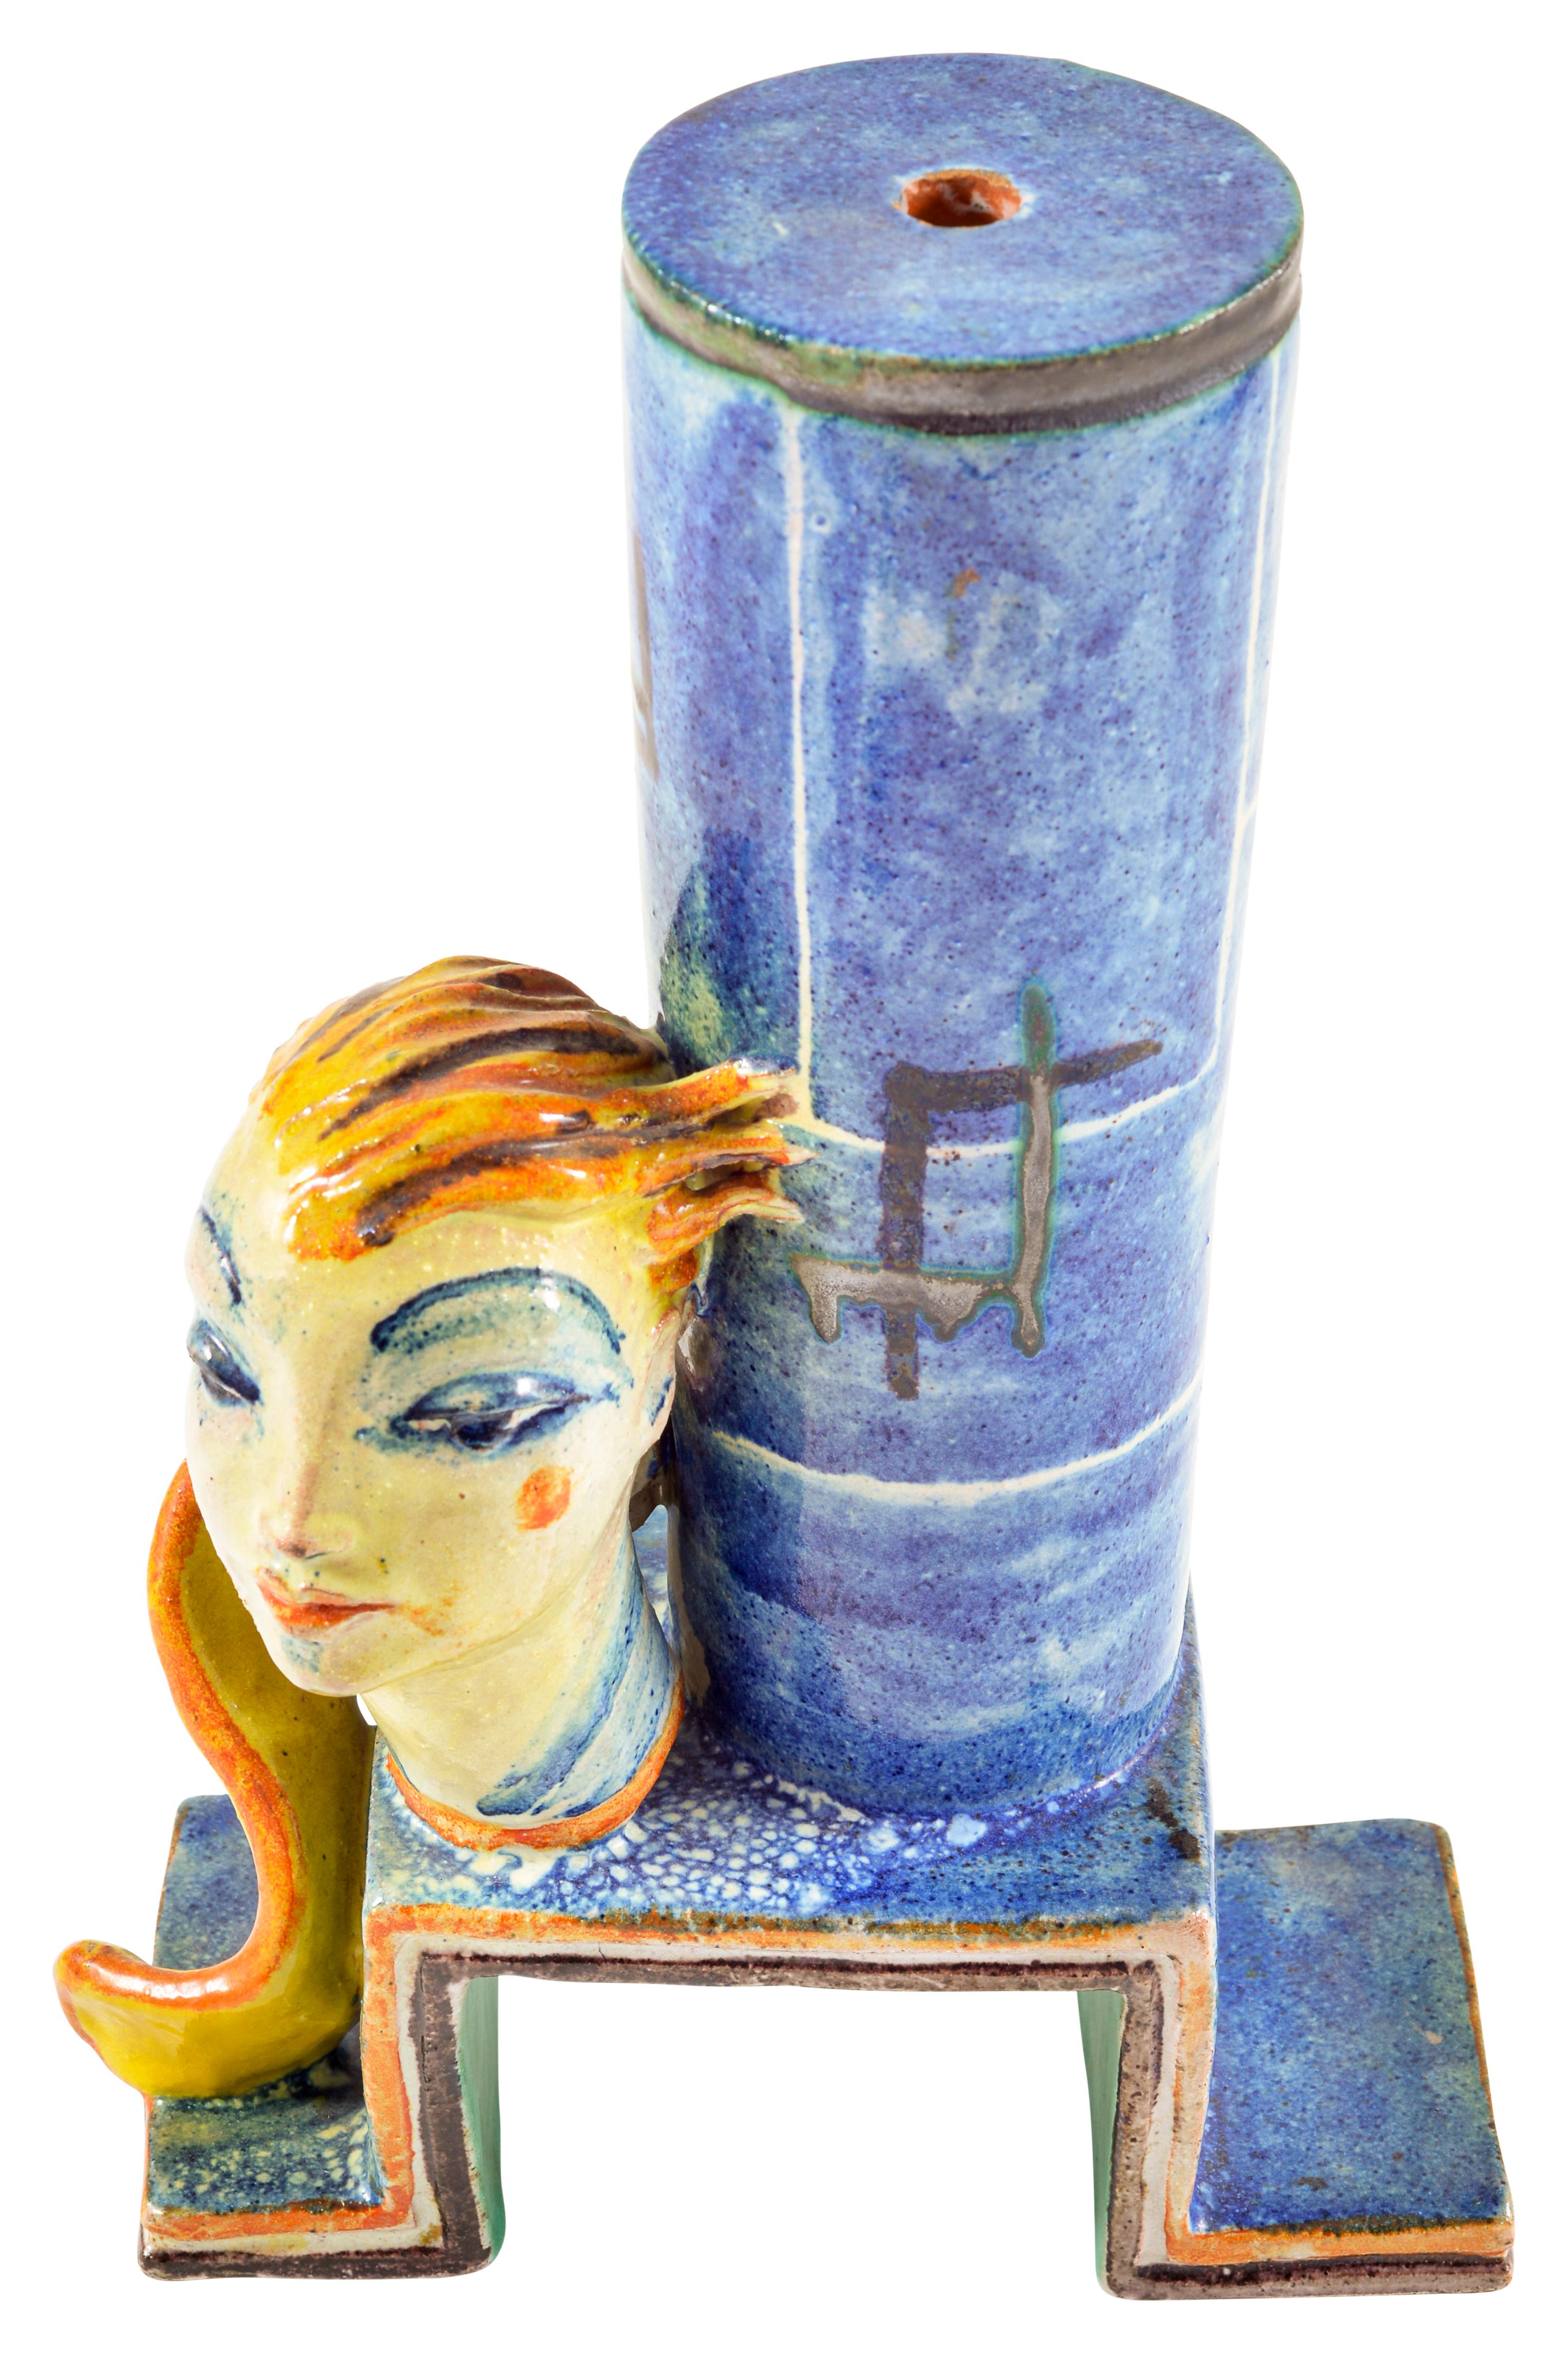 Ceramic lamp stand with expressive head designed by Gudrun Baudisch executed by Wiener Werkstatte ca. 1928 marked Austrian Art

In this ceramic object, Gudrun Baudisch combines her characteristic head depictions with a sculptural lamp base. In